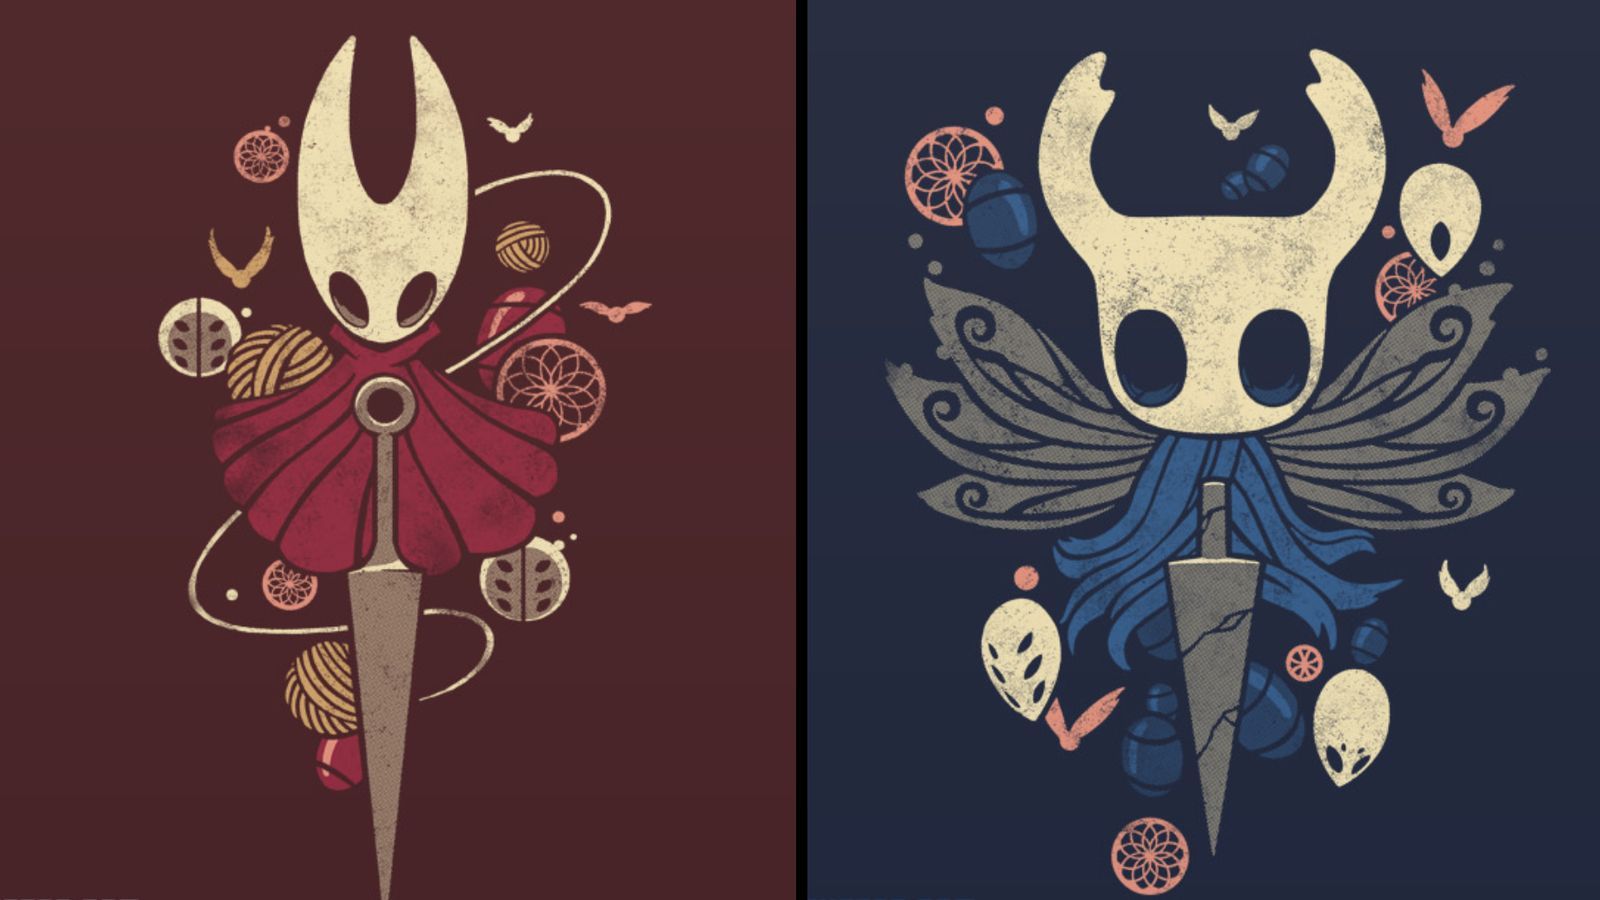 Hollow Knight and Hornet Art in 2019 Knight Hollow night